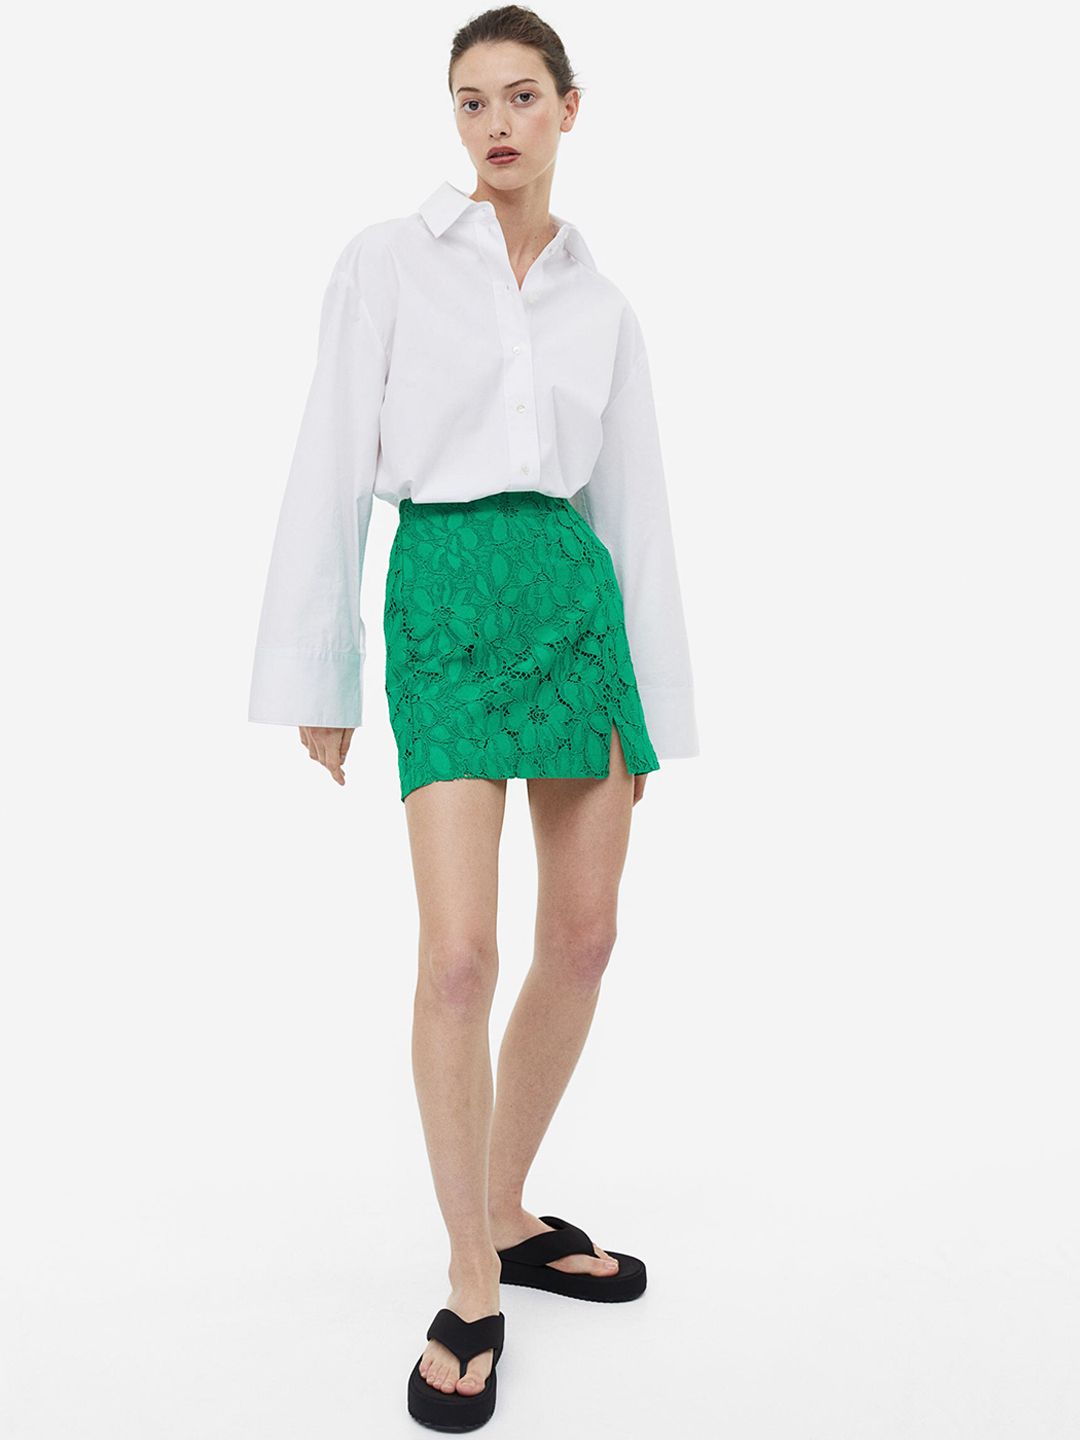 H&M Lace Mini Skirt Price in India